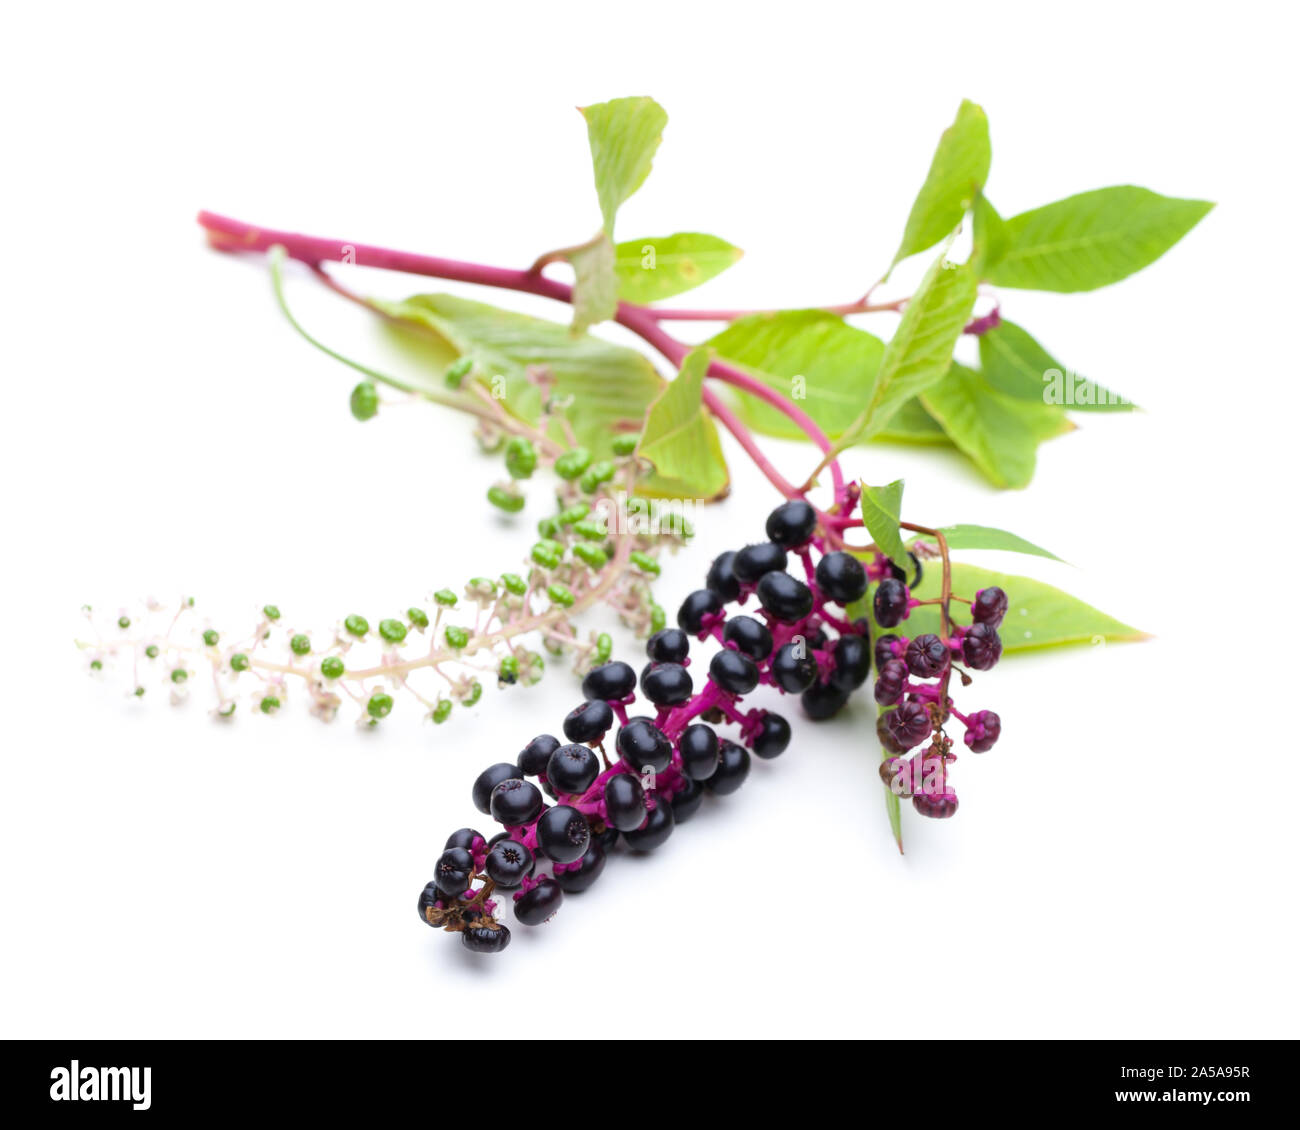 American pokeweed (Phytolacca americana) - blossom and berries Stock Photo